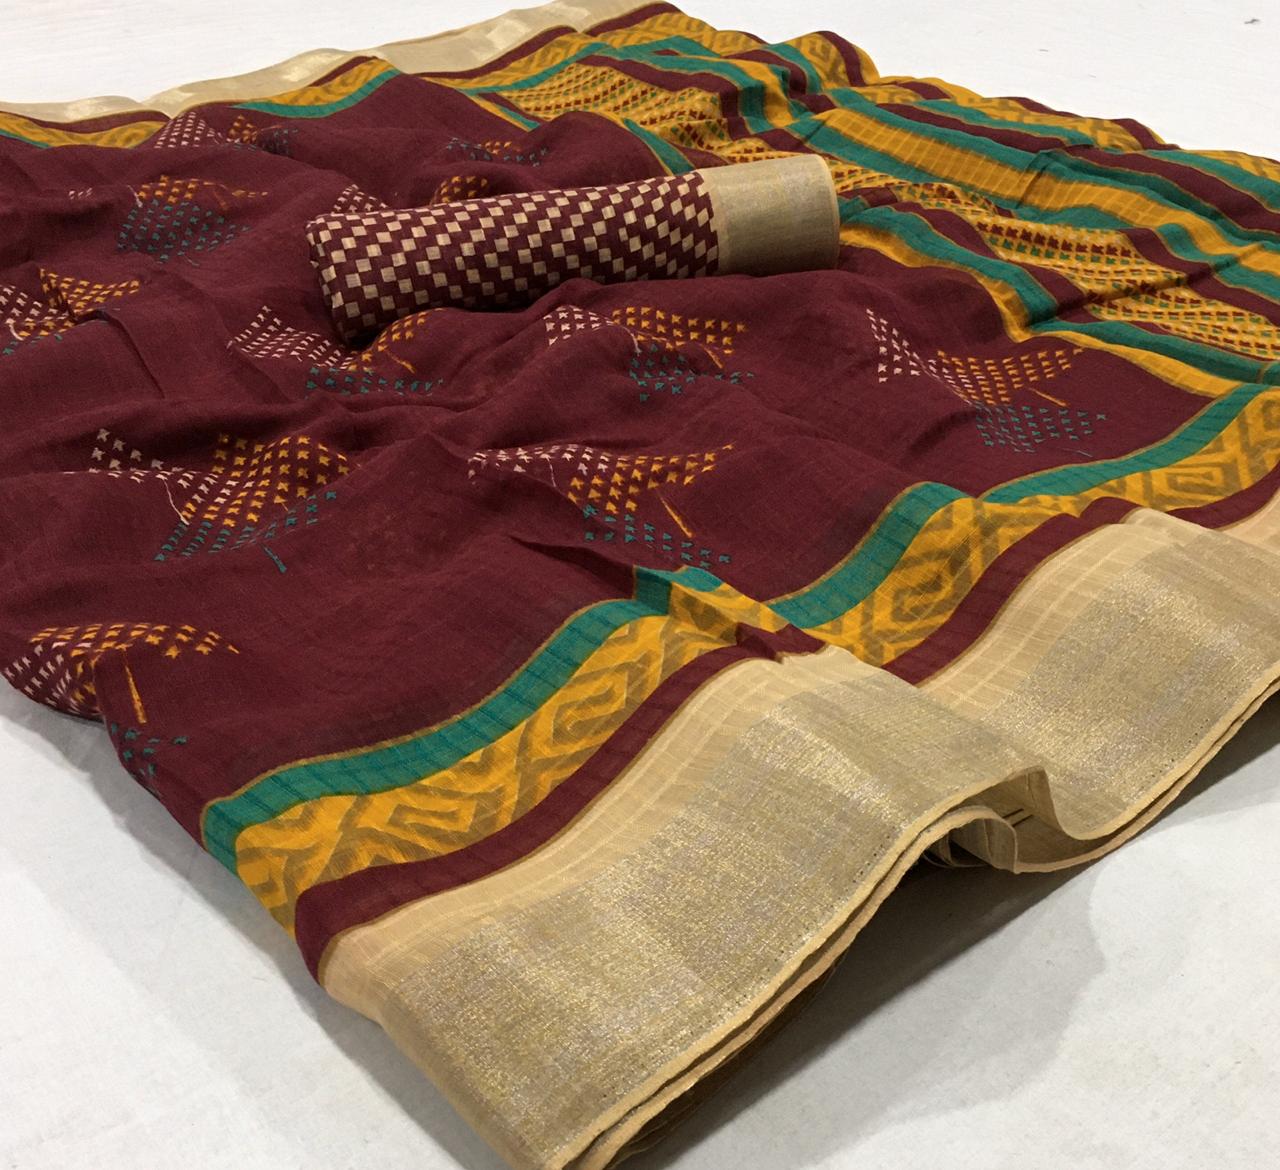 Staring Dark Brown  Colored Partywear Printed Pure Linen saree